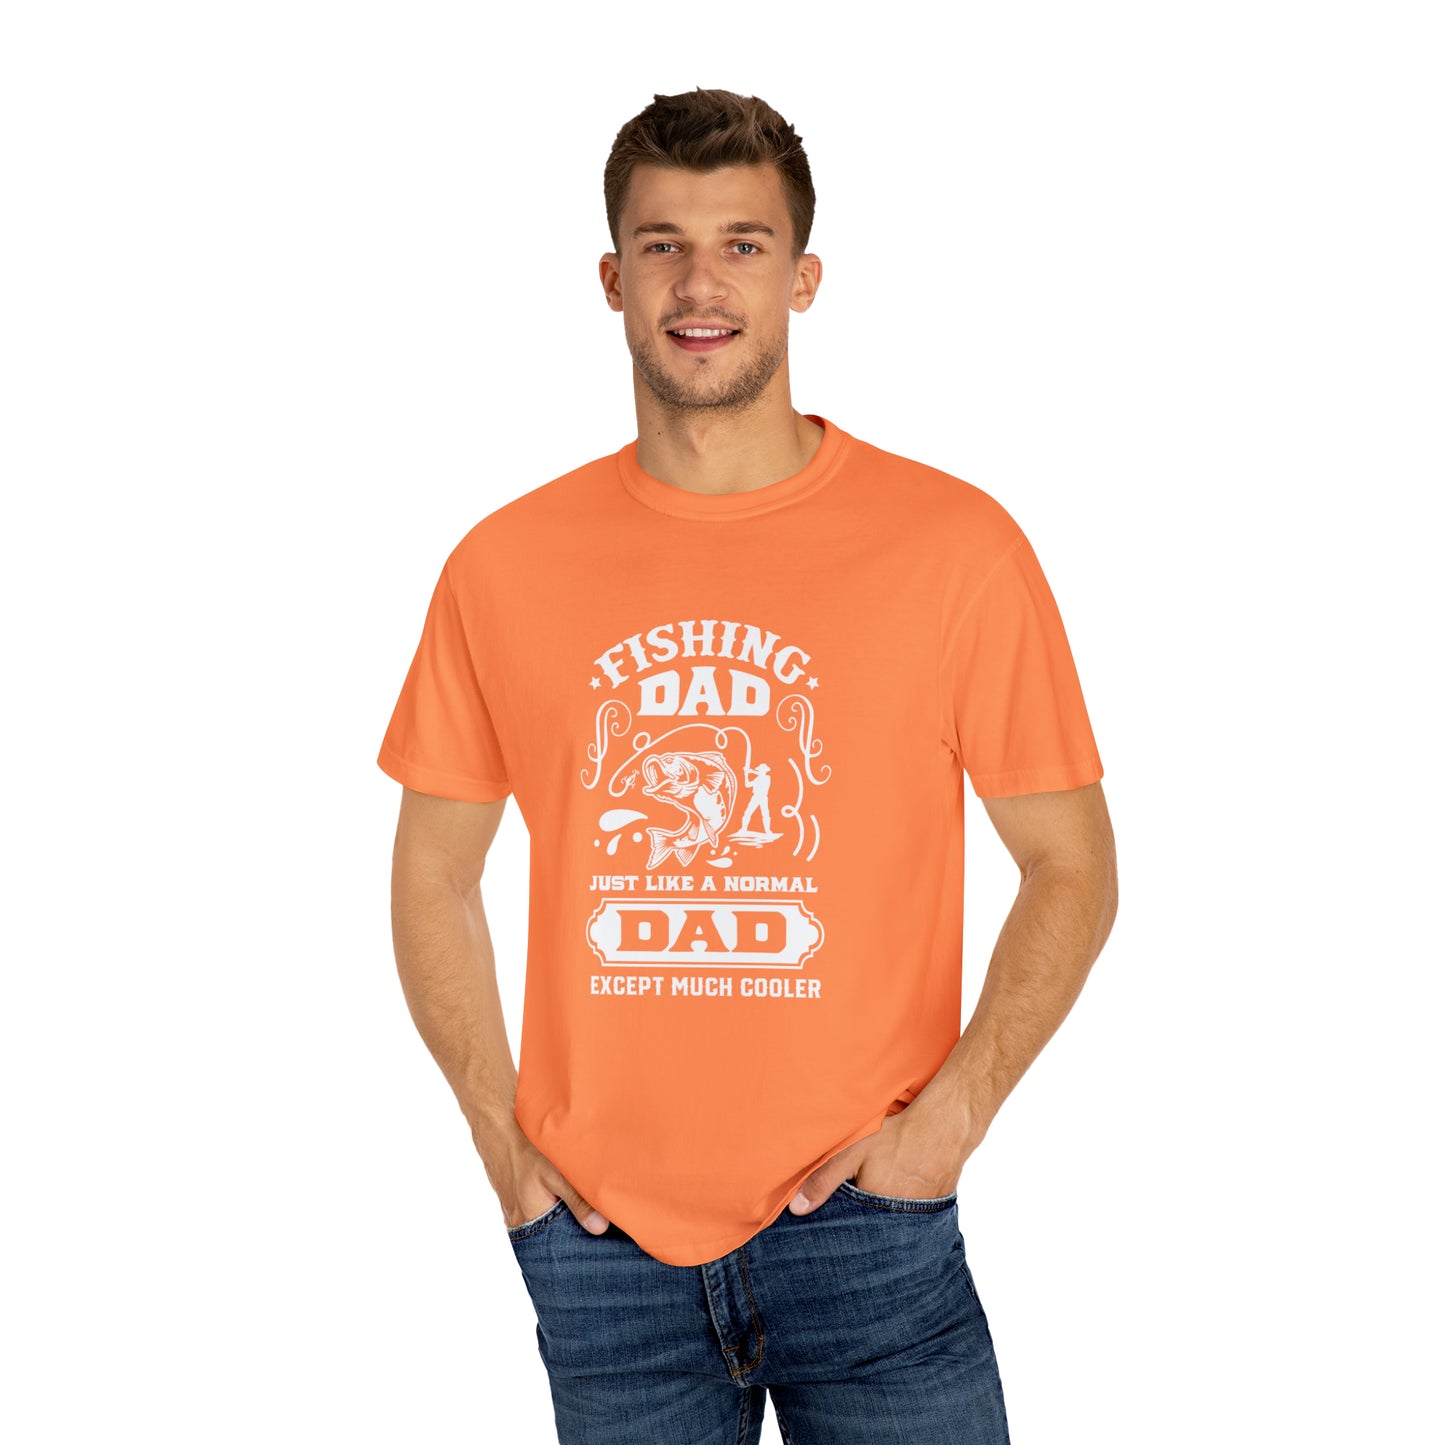 Reel Cool Grandpa: Embrace the Outdoors with Style in this T-shirt